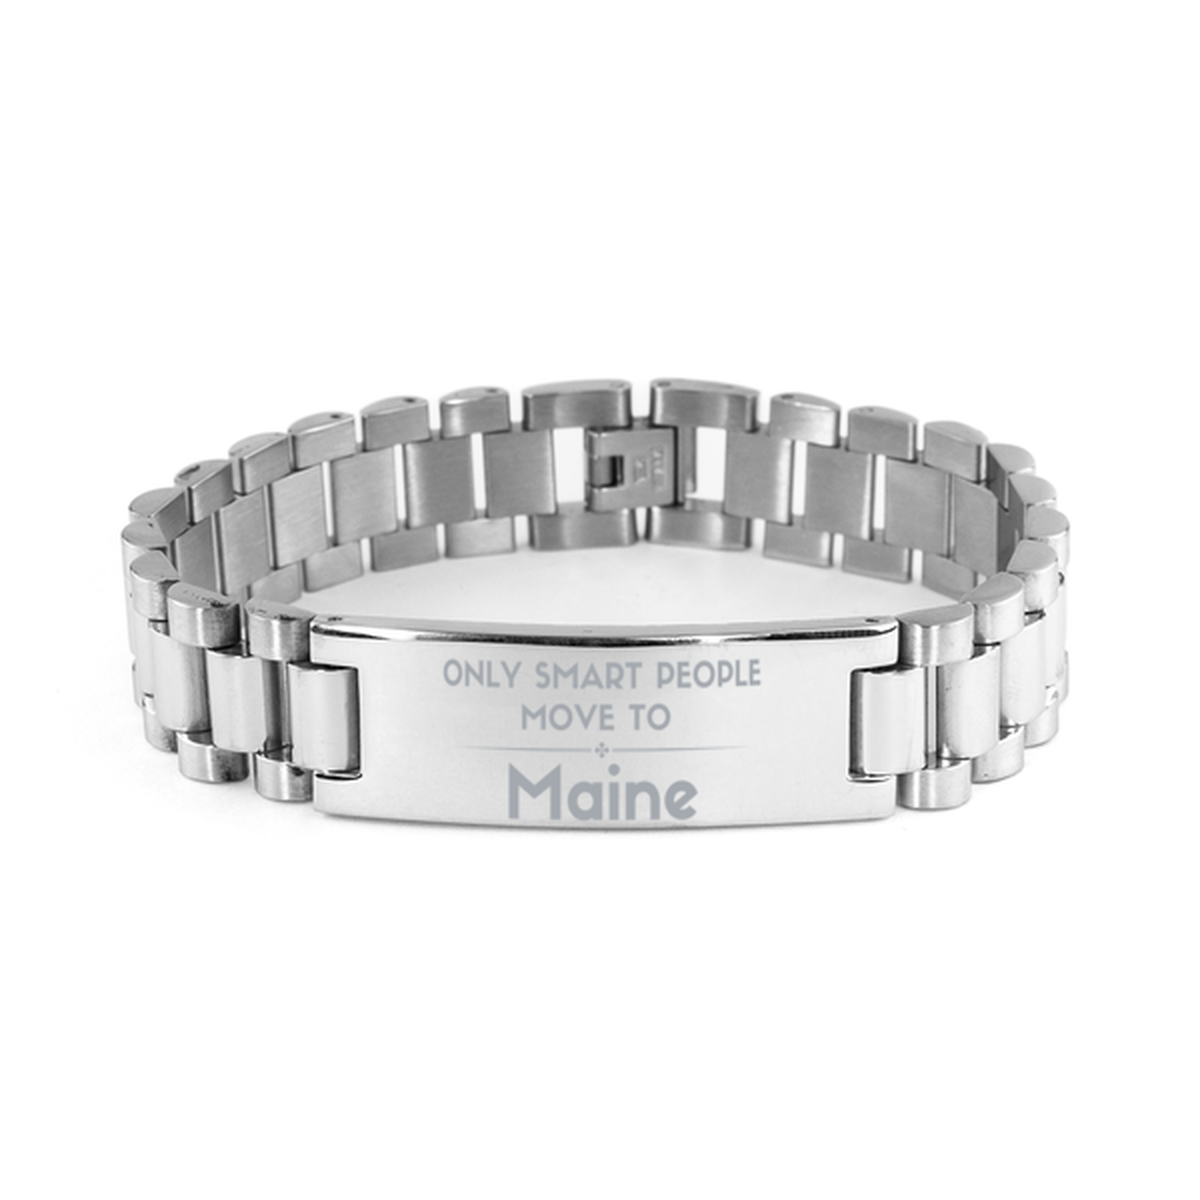 Only smart people move to Maine Ladder Stainless Steel Bracelet, Gag Gifts For Maine, Move to Maine Gifts for Friends Coworker Funny Saying Quote